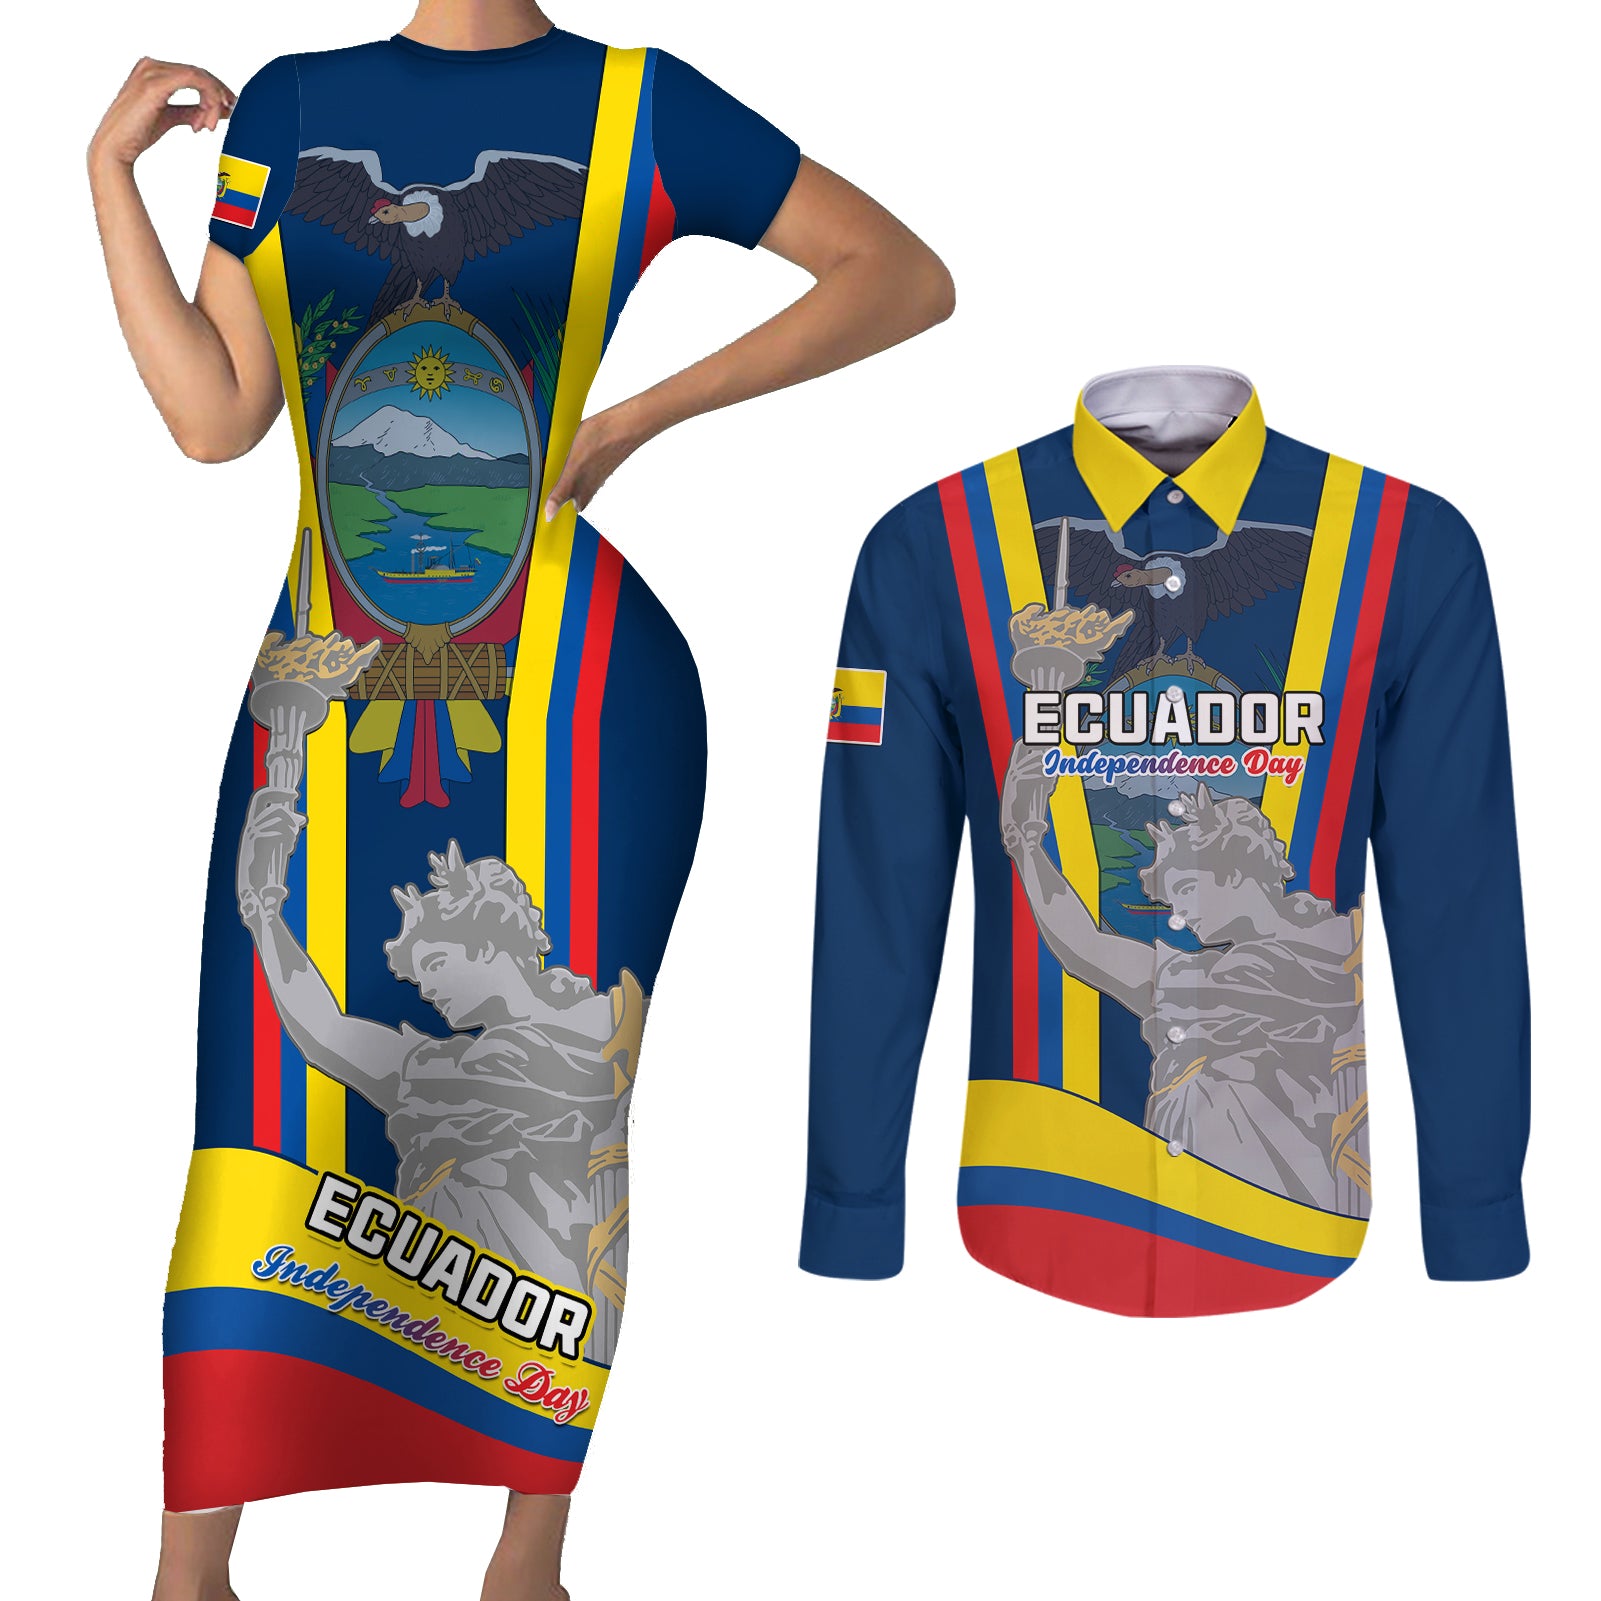 ecuador-independence-day-couples-matching-short-sleeve-bodycon-dress-and-long-sleeve-button-shirts-monumento-a-la-independencia-quito-10th-august